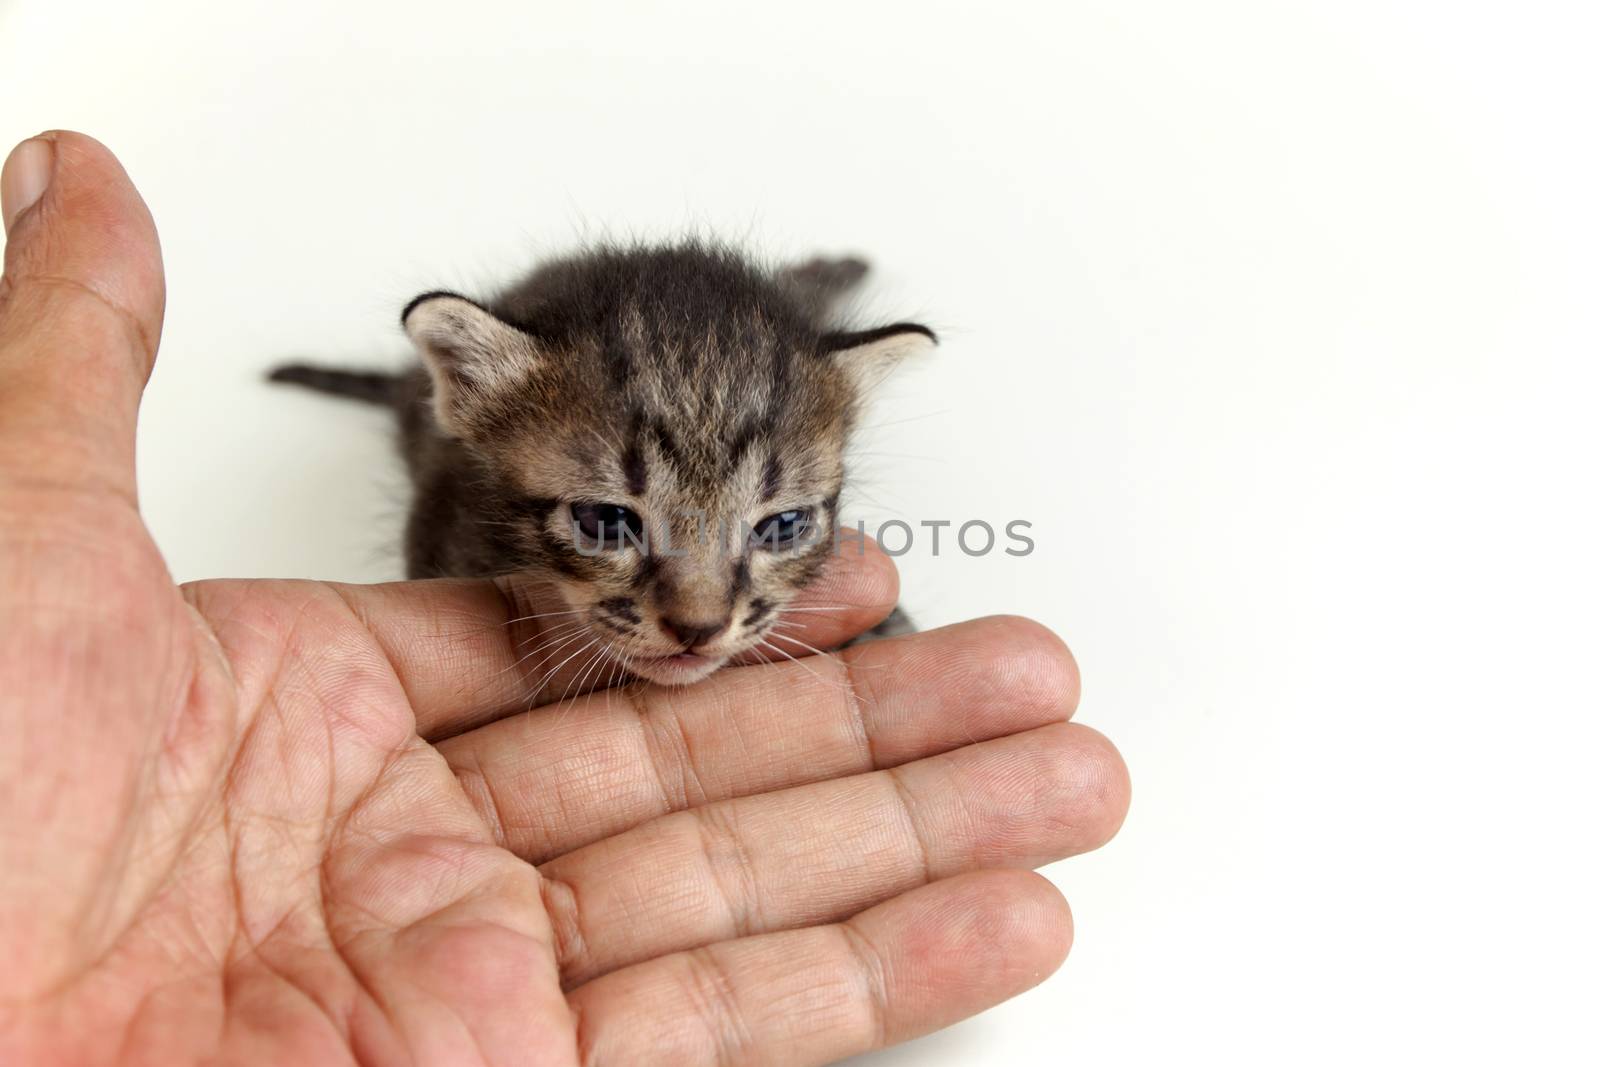 human hand gentle and brown tabby kitten by PeachLoveU